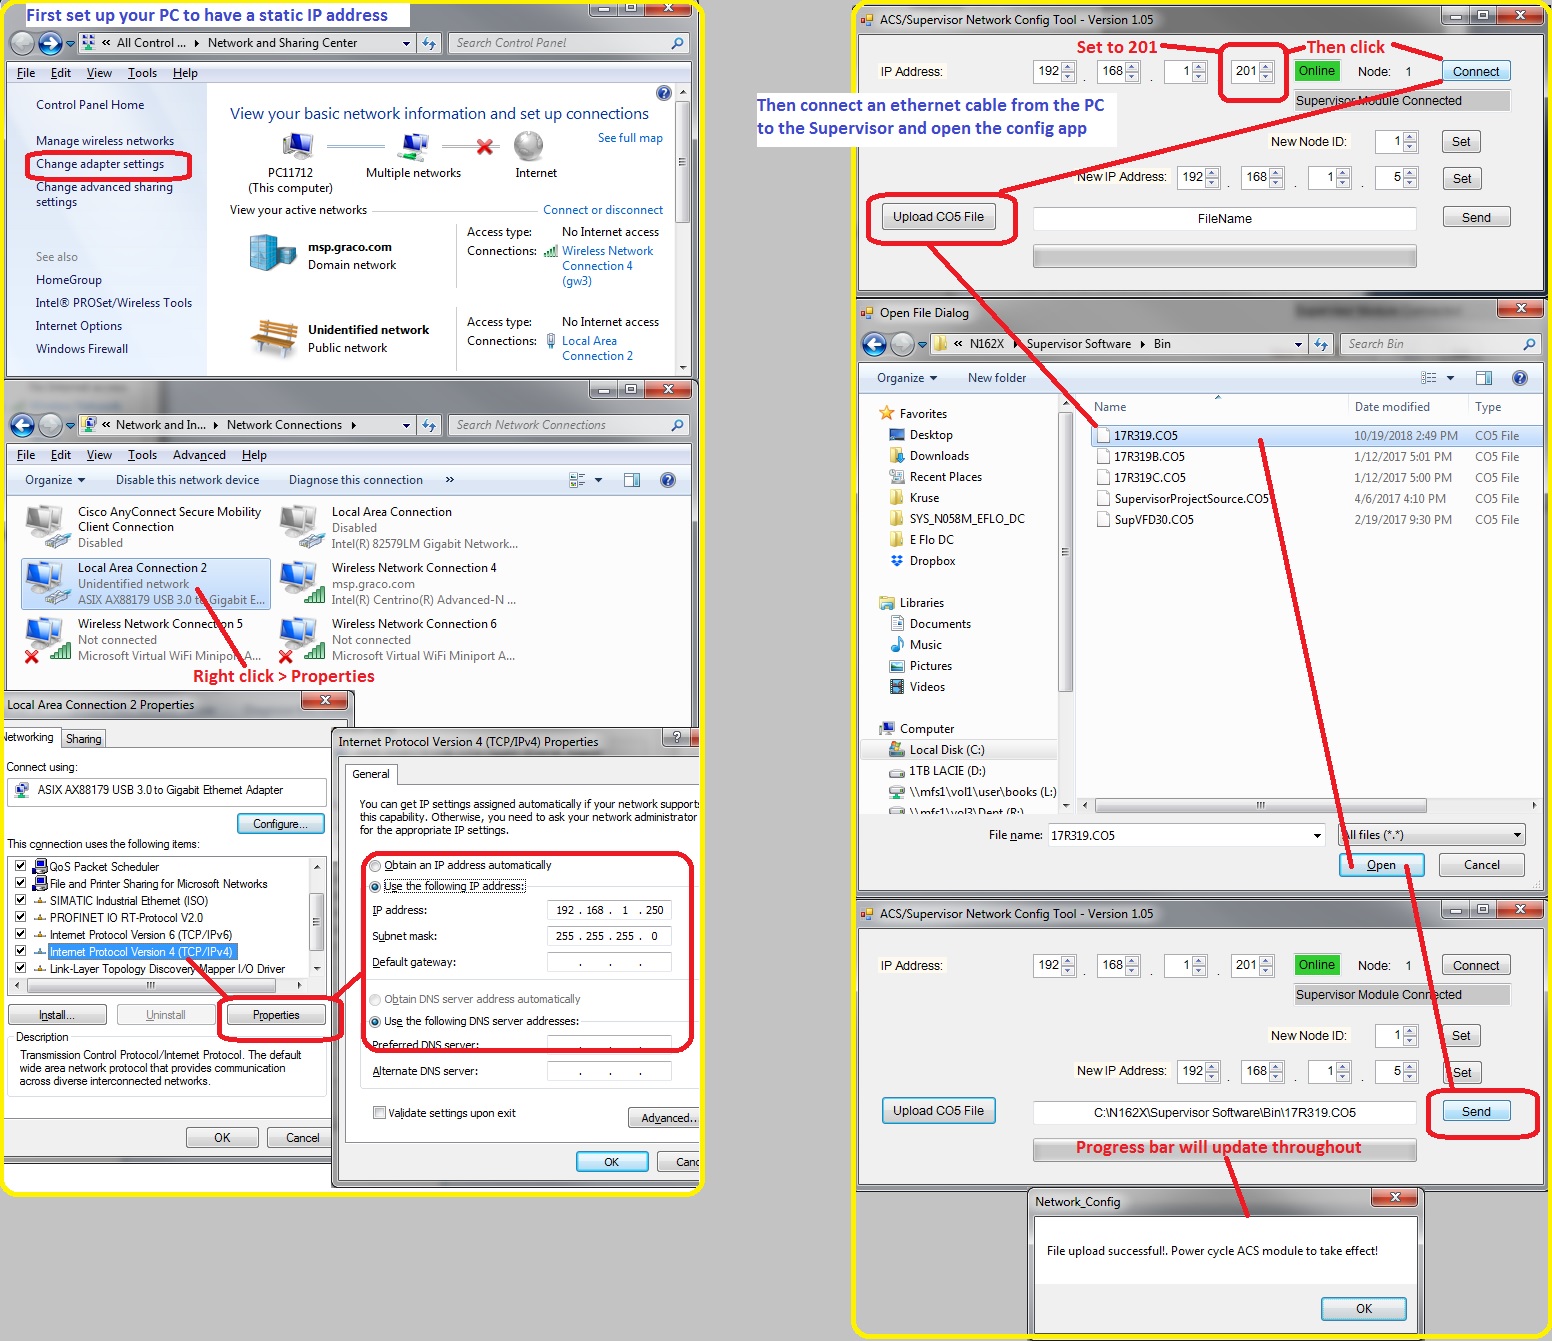 Screen shots show upload instructions for ACS software